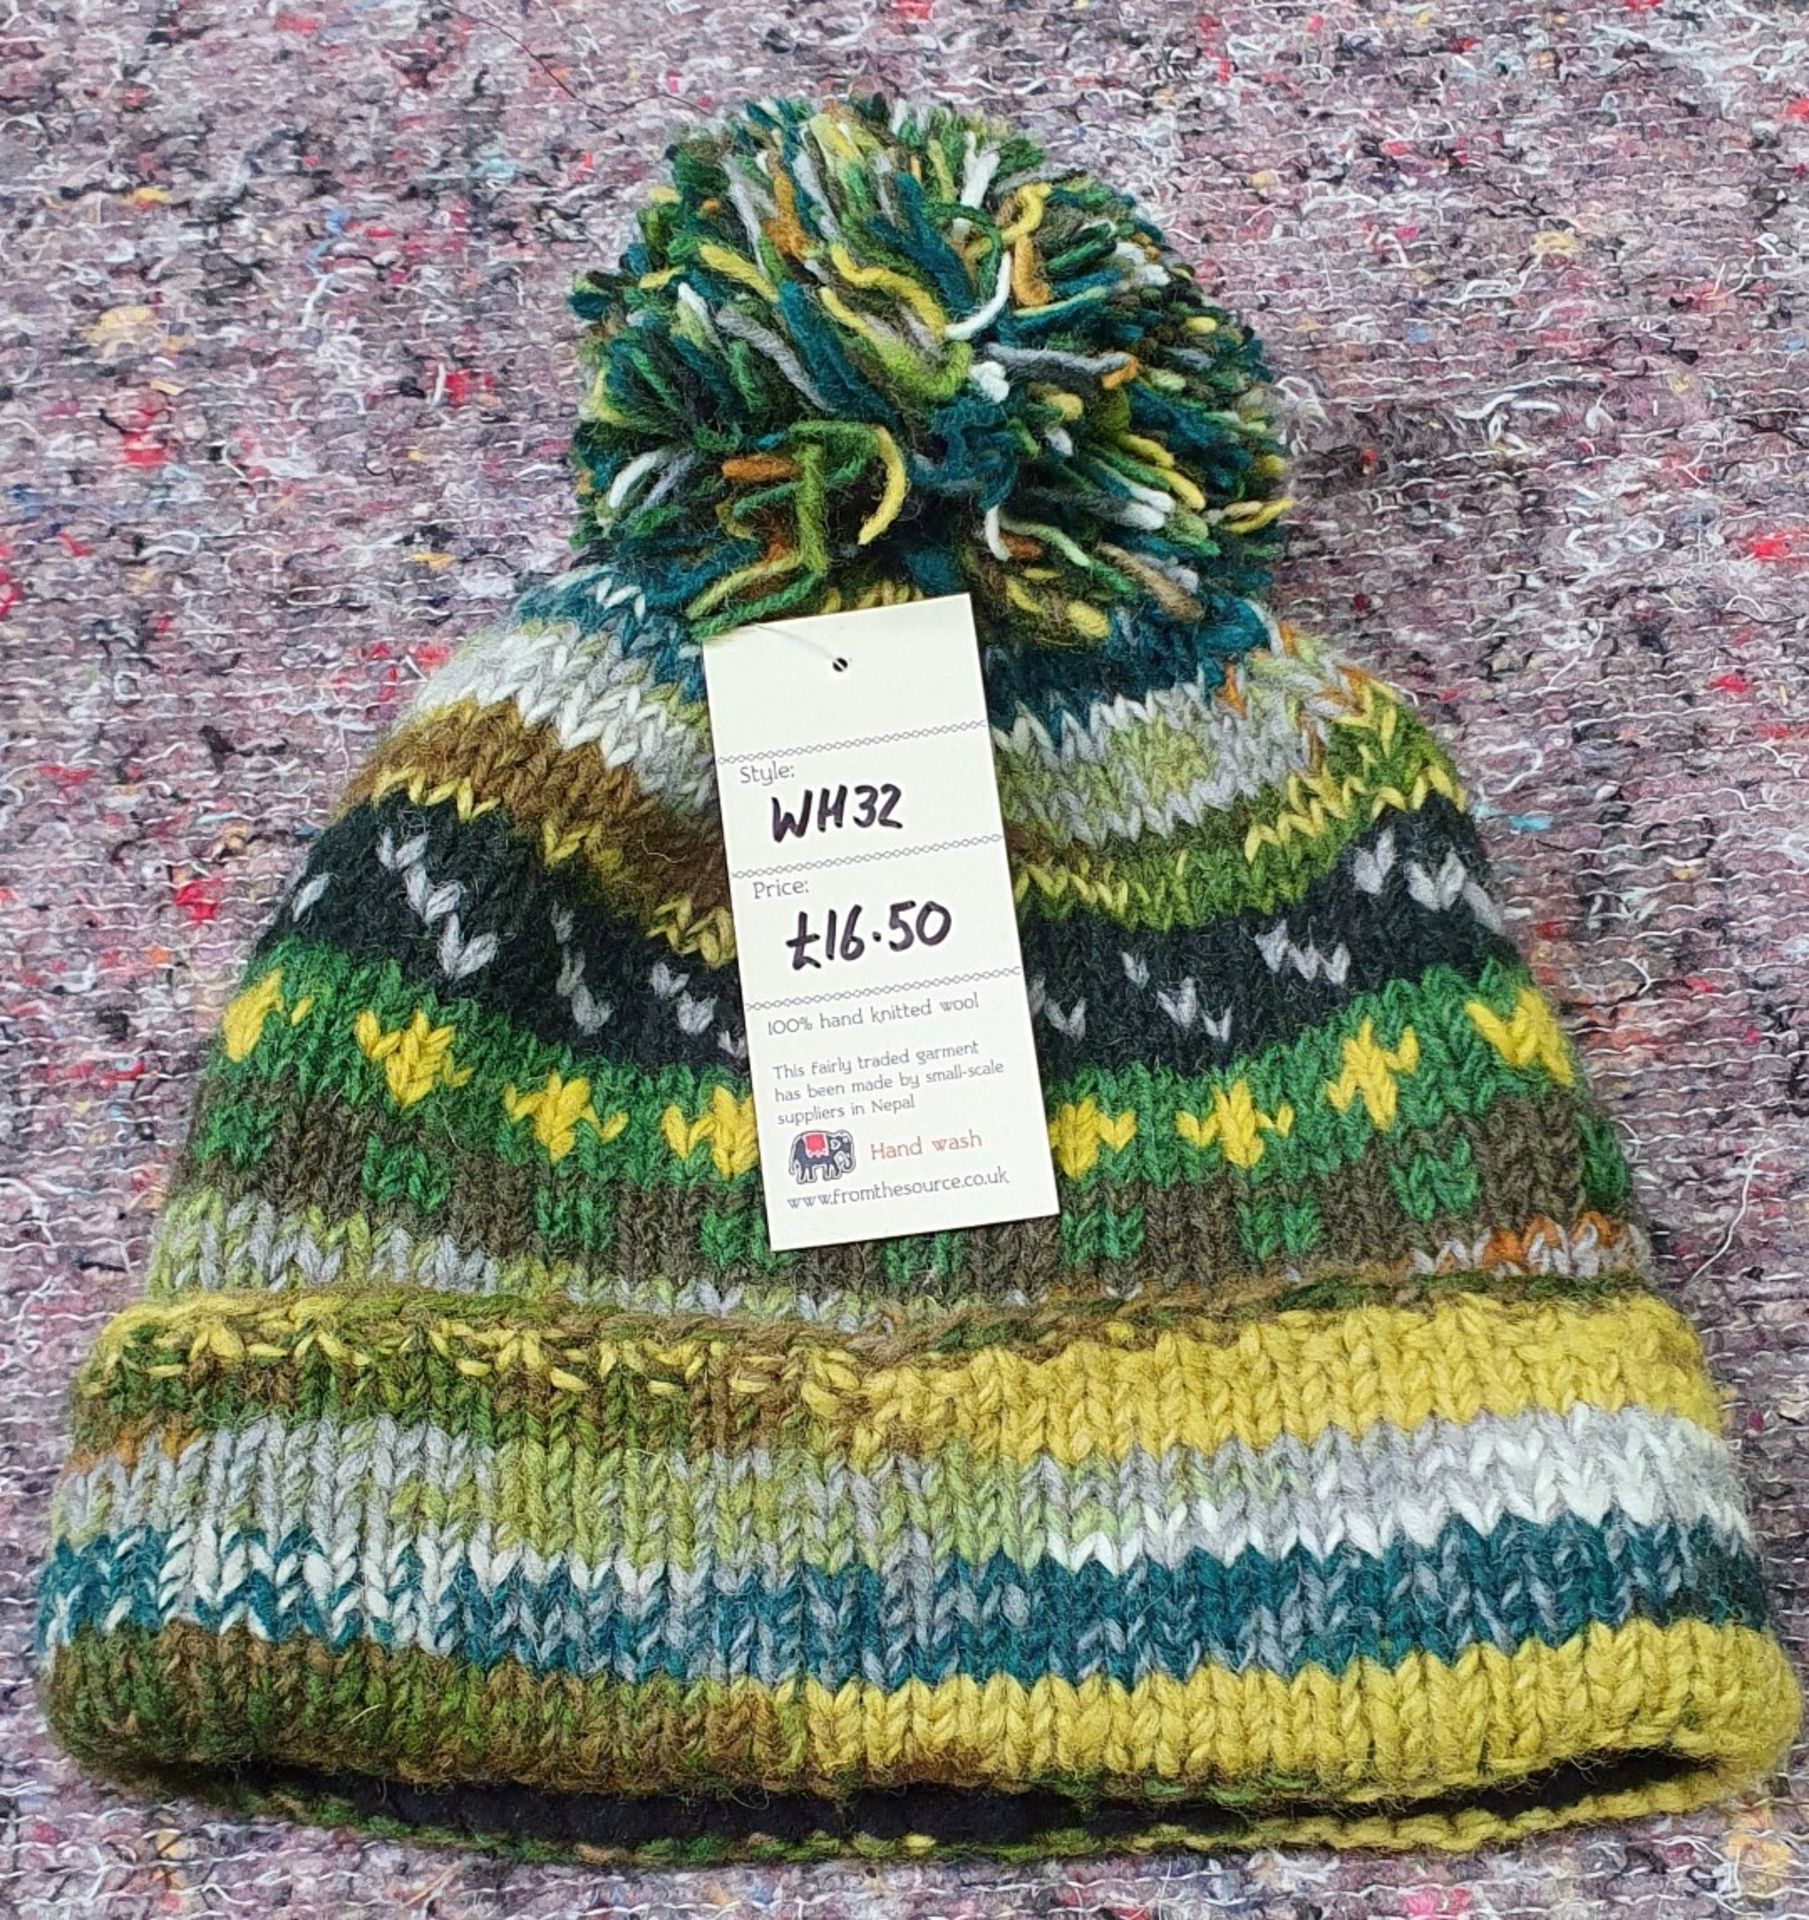 3 x Woolly Bobble Hats by From The Source - New Stock - RRP £49 - Ref: TCH237 - CL840 - Location: - Image 8 of 8